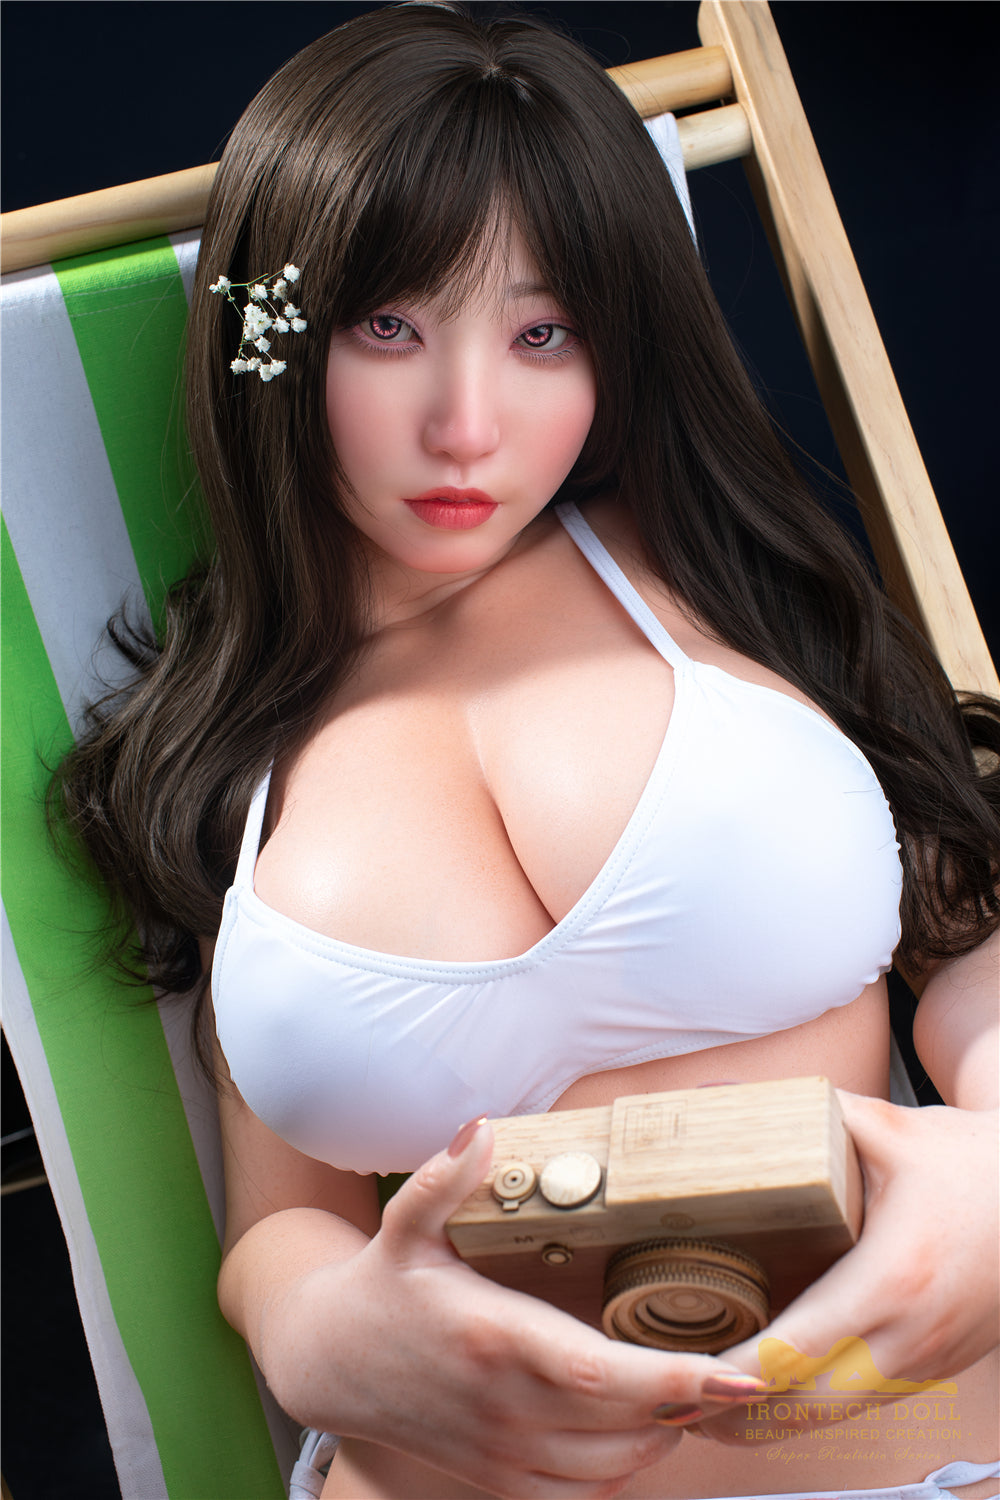 Irontech Doll 165 cm F Silicone - Jaliyah | Buy Sex Dolls at DOLLS ACTUALLY